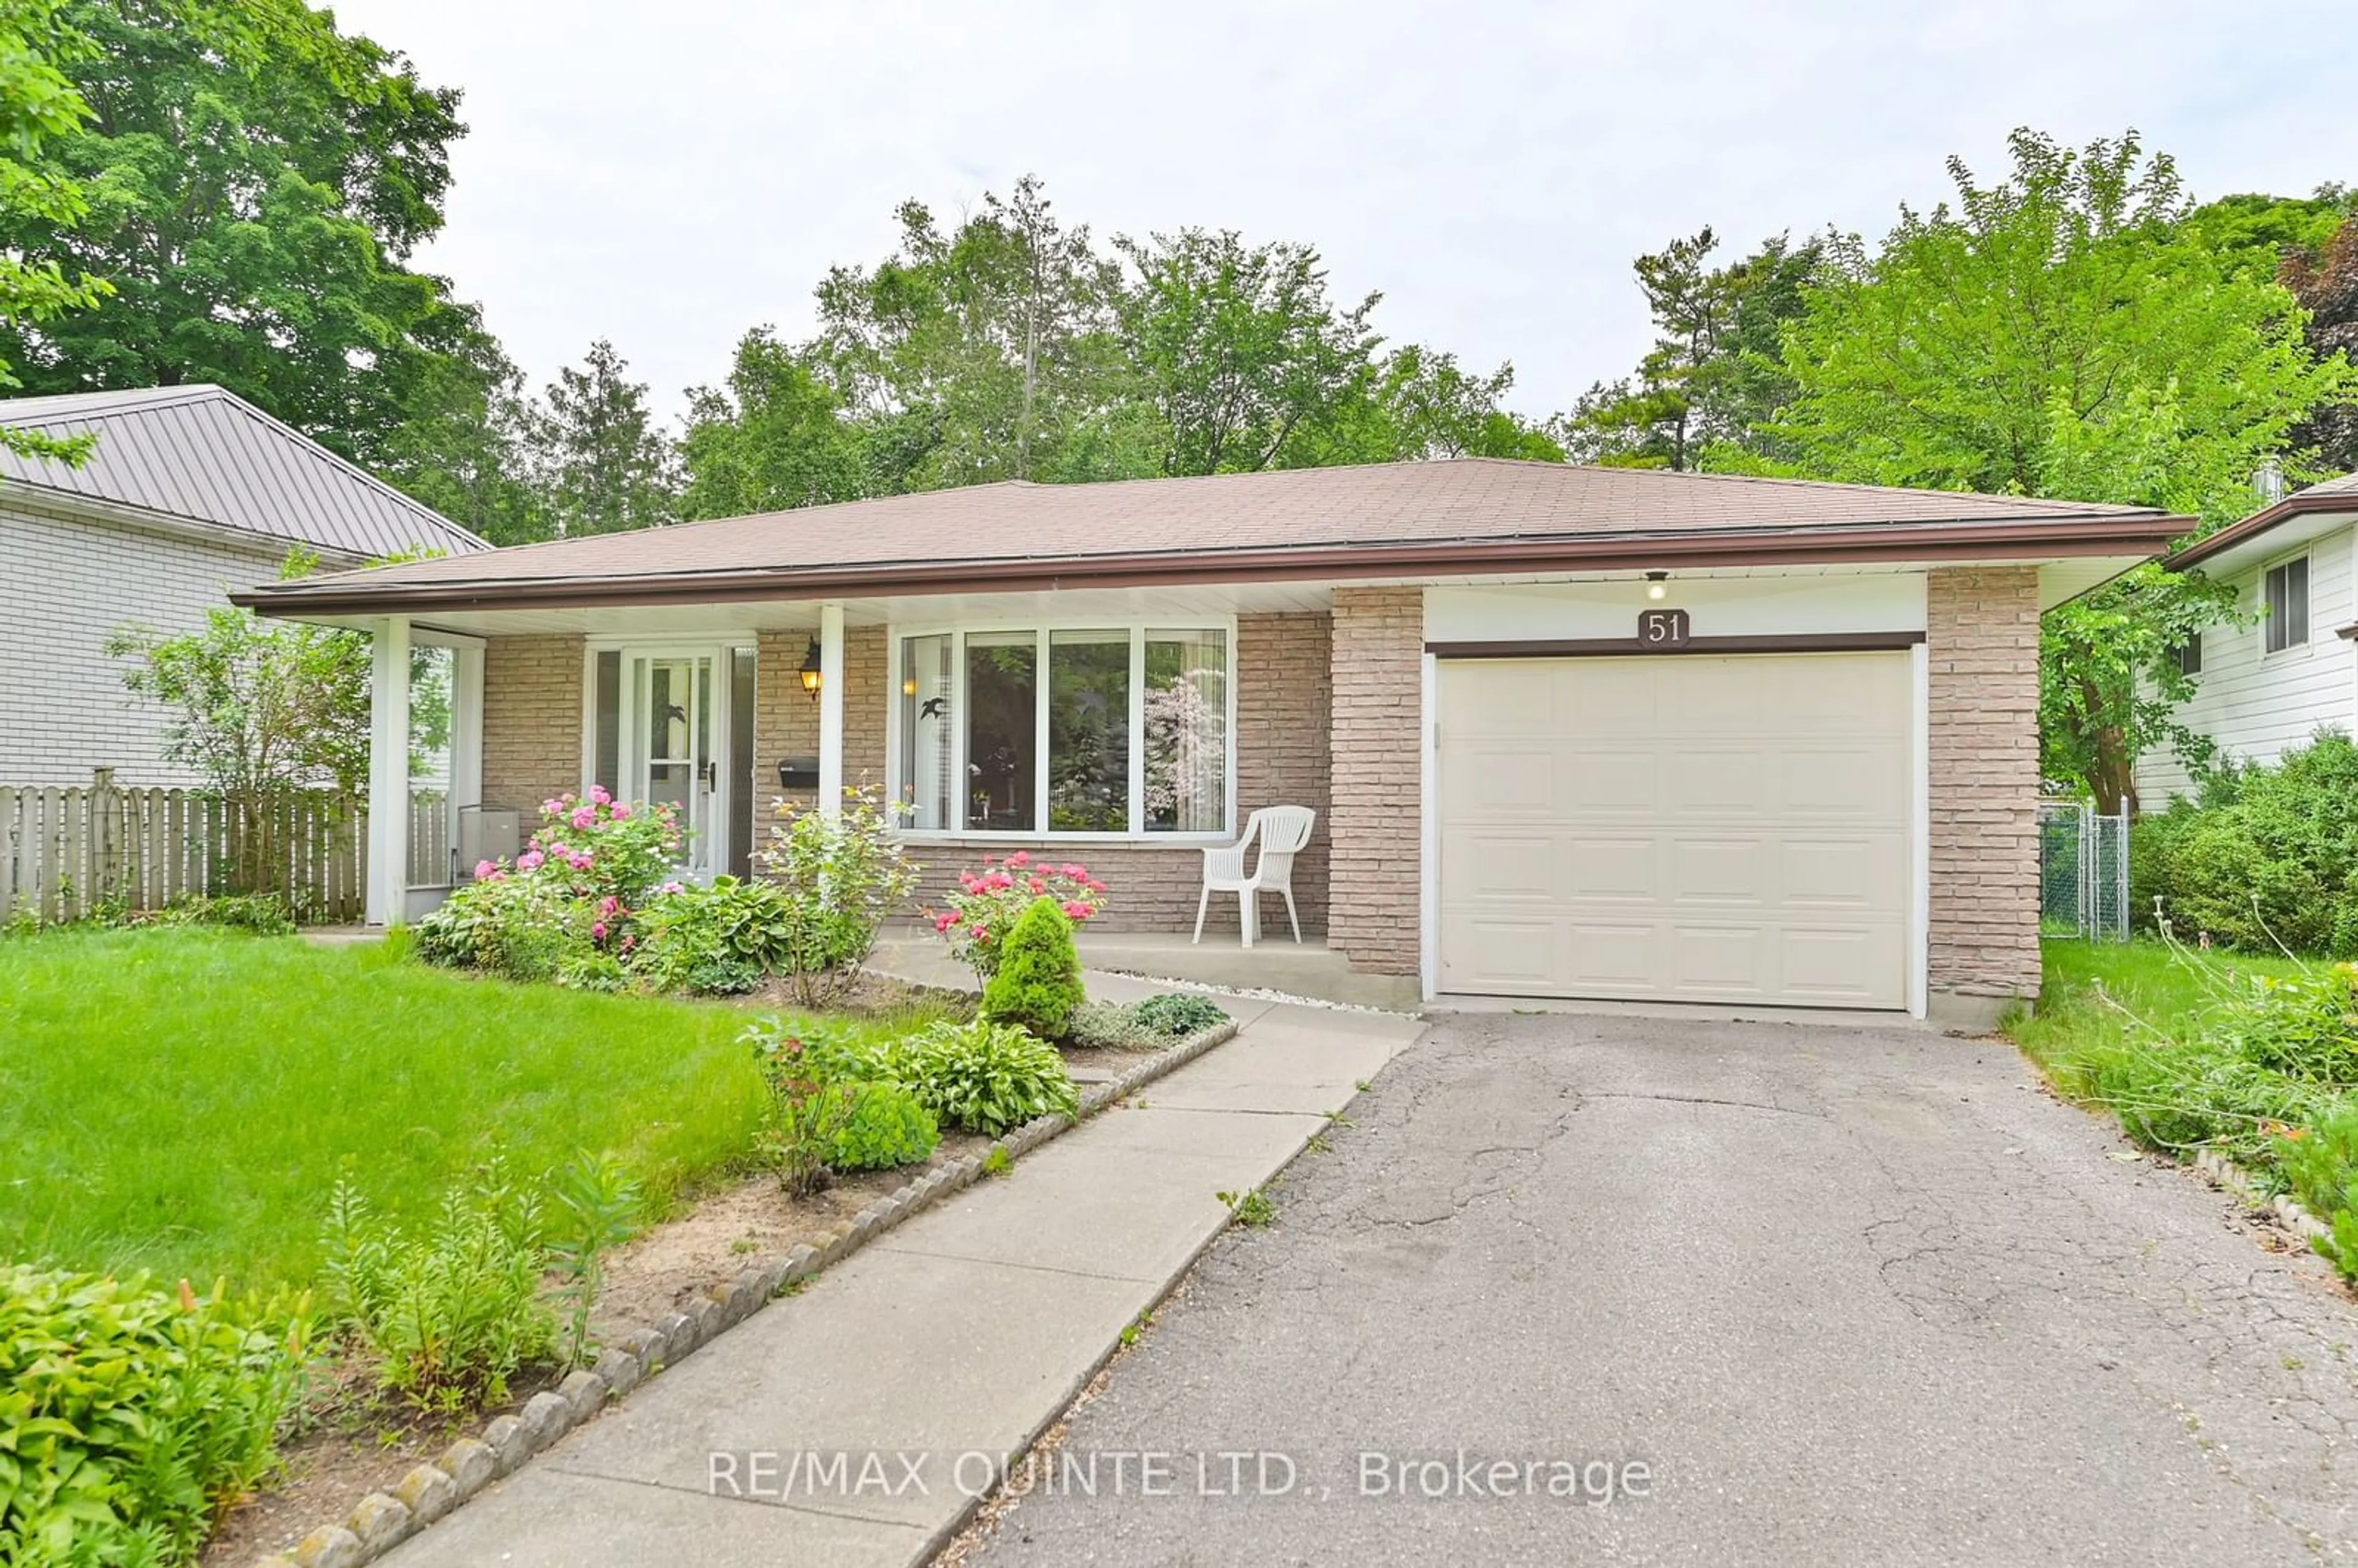 Home with brick exterior material for 51 Parkview Hts, Quinte West Ontario K8V 5T9